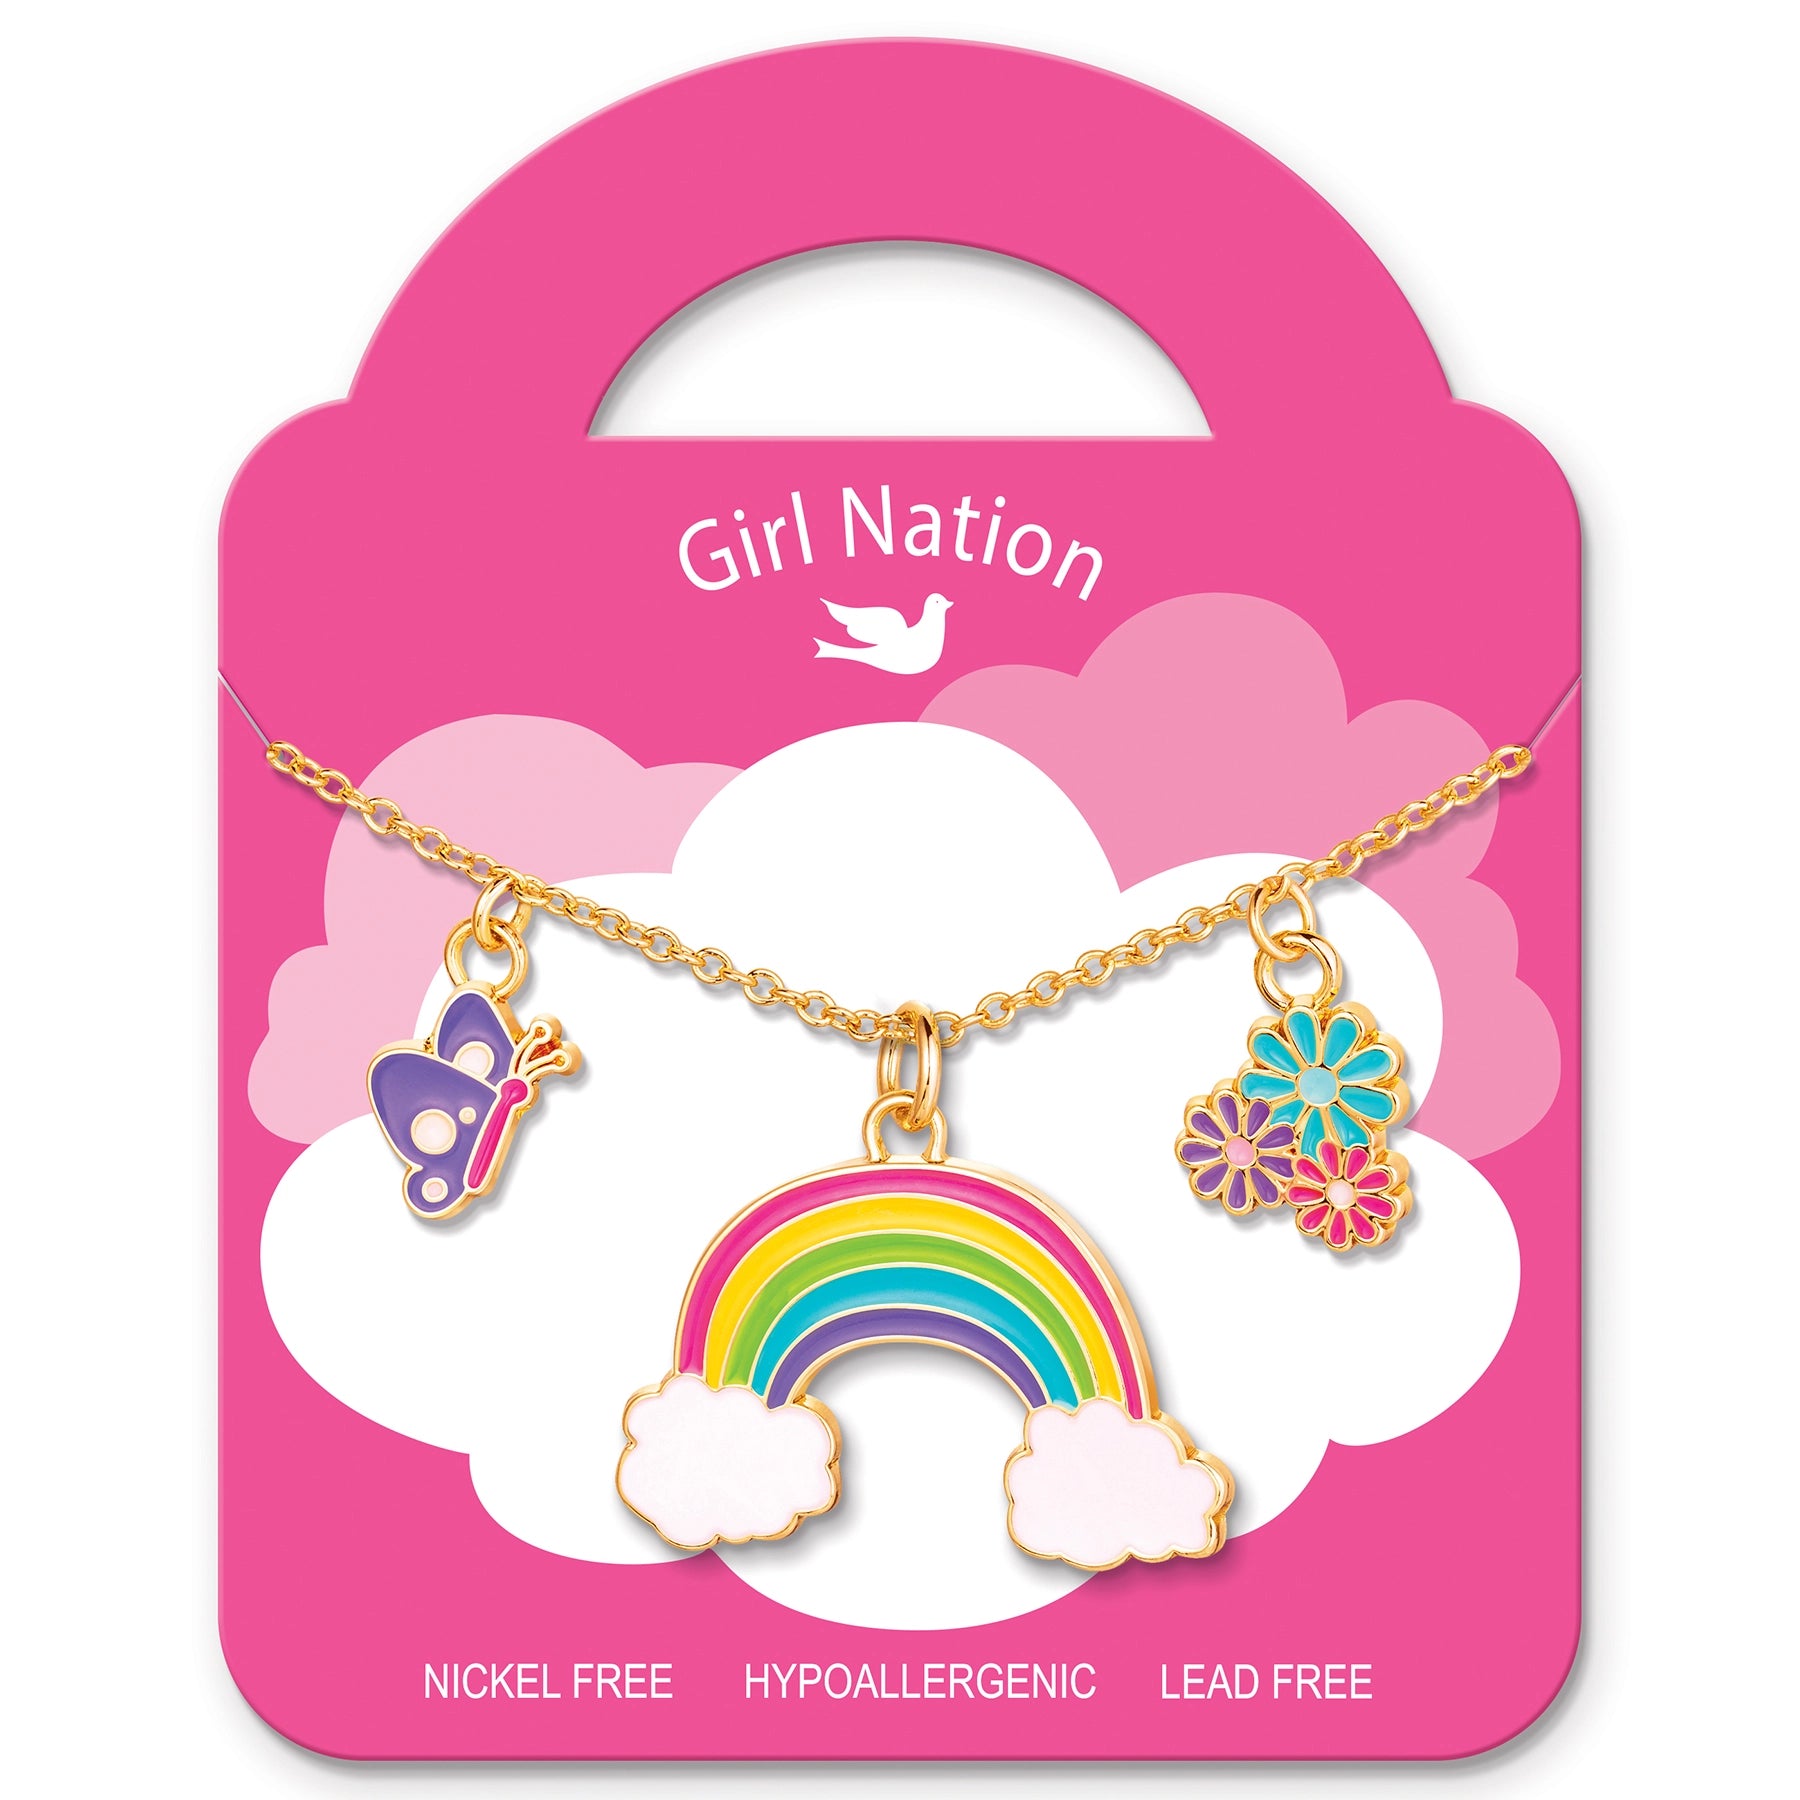 Girl Nation Charming Whimsy Necklace - Cloud Luvs Rainbow